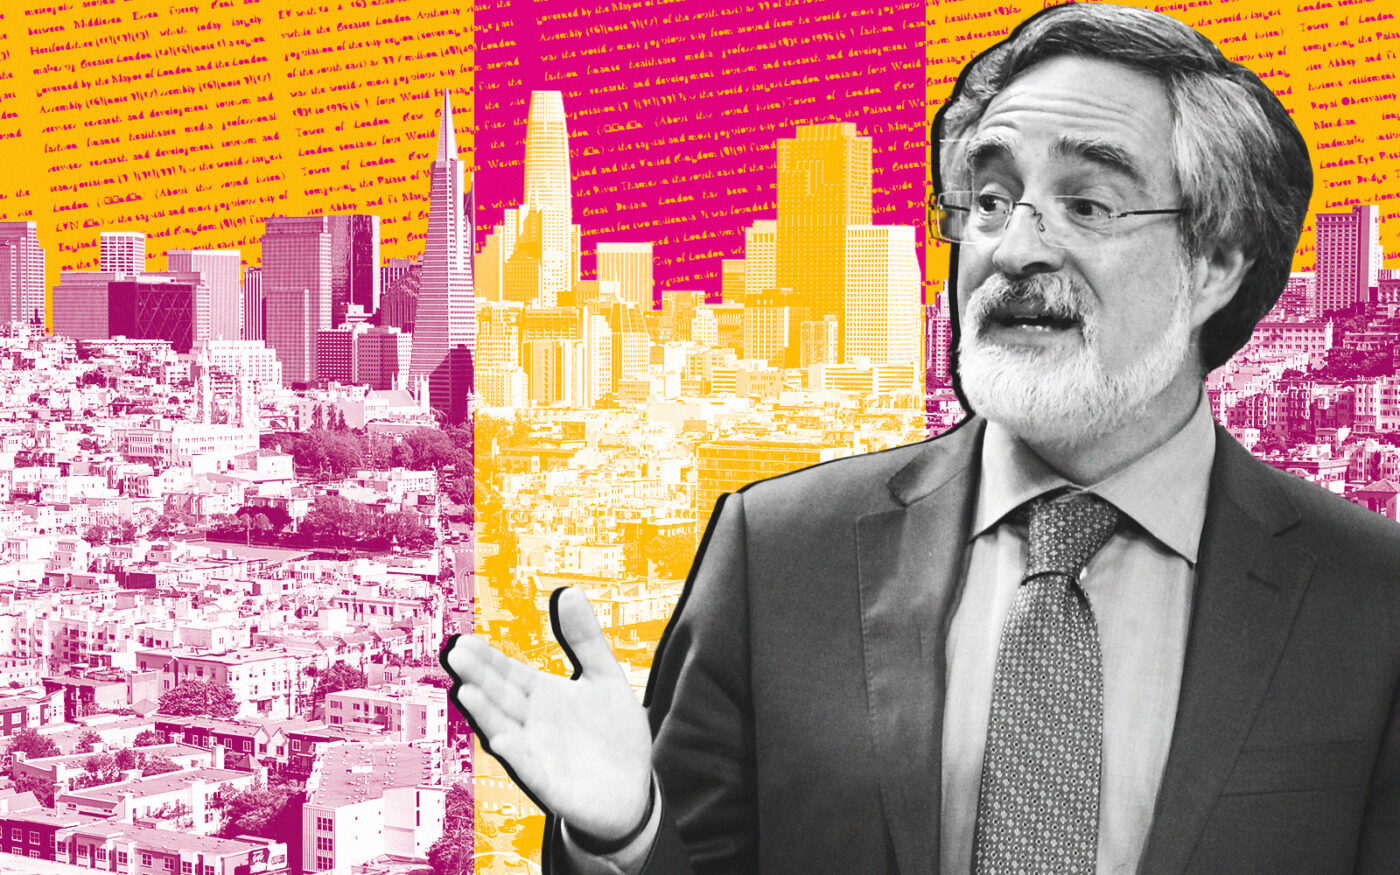 SF’s Aaron Peskin Looks to Fund “Missing Middle” Housing